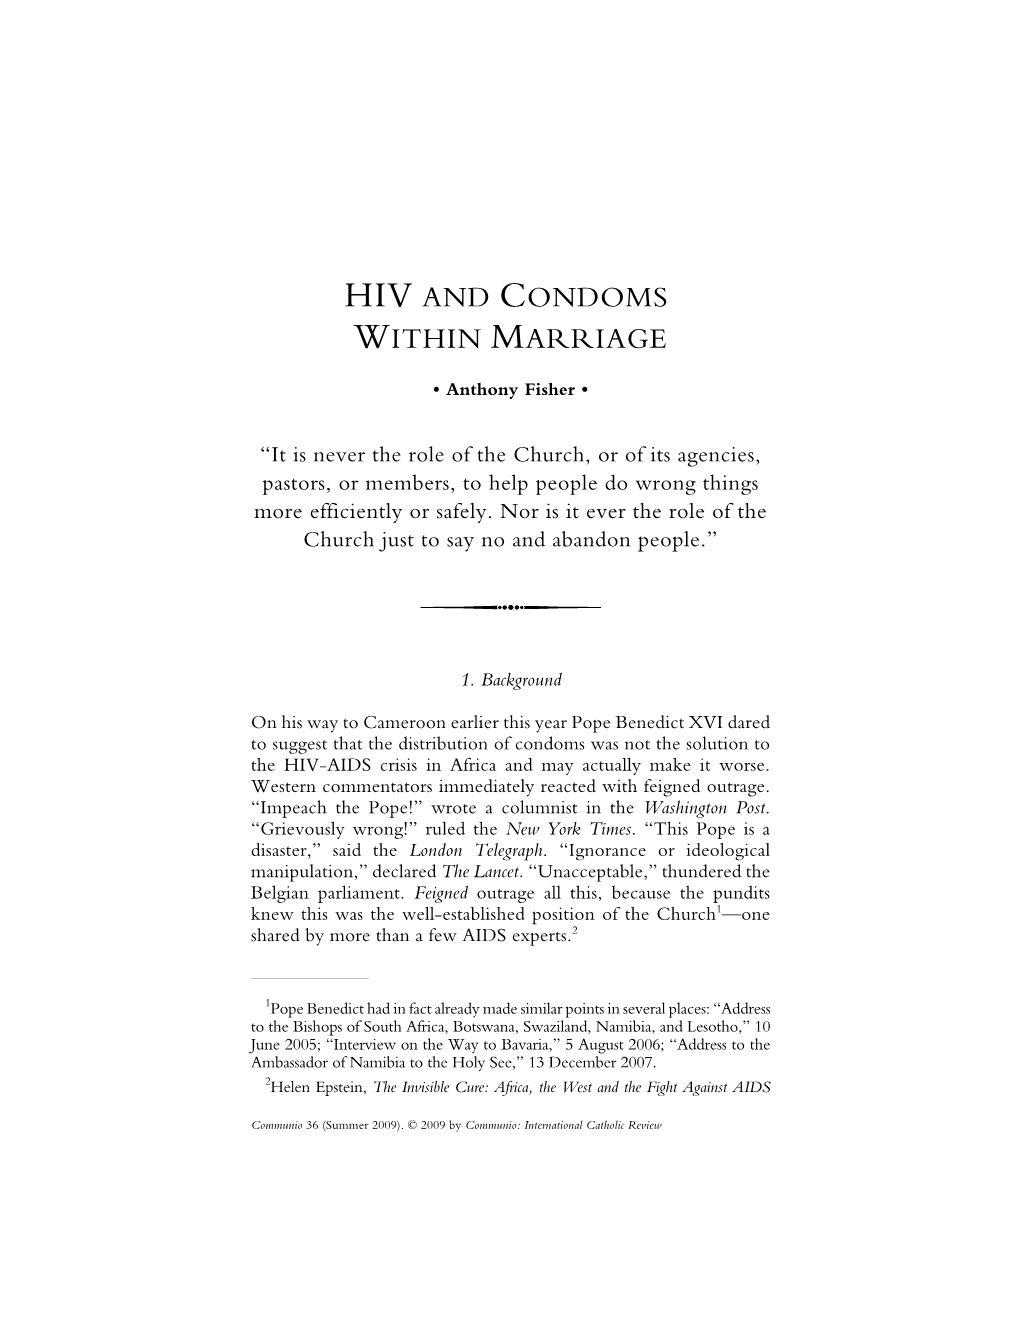 Anthony Fisher OP. HIV and Condoms Within Marriage. Communio 36